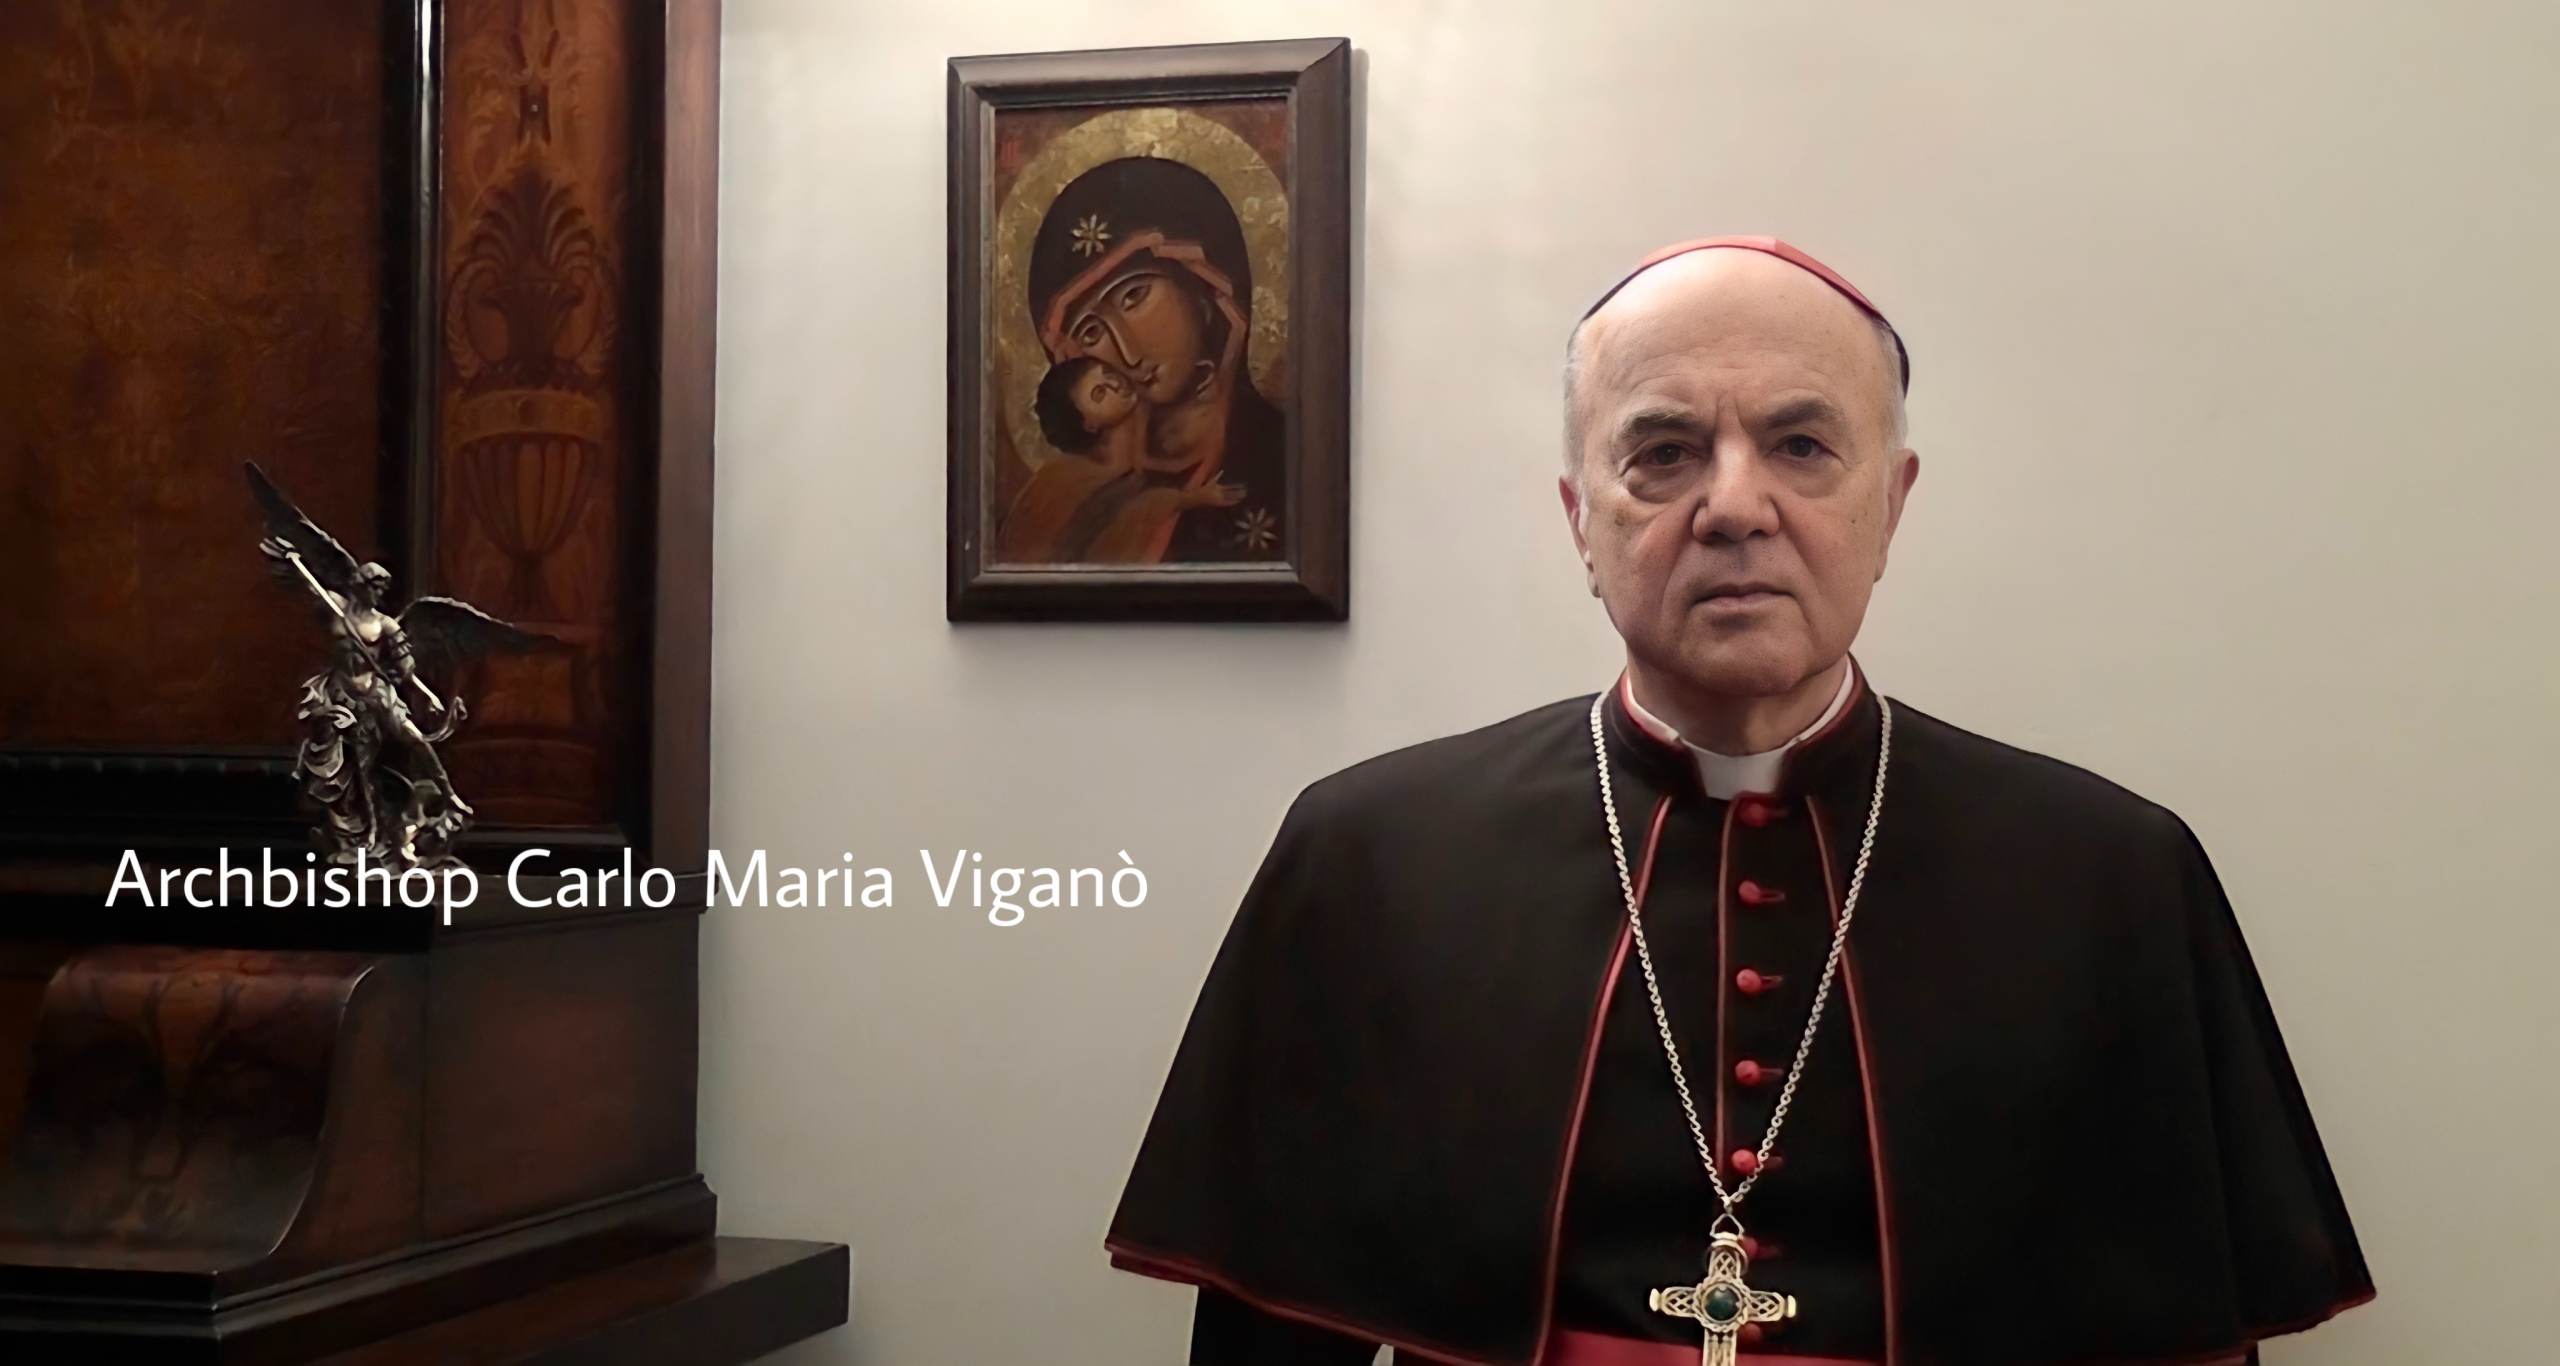  HUGE EXCLUSIVE: Archbishop Carlo Maria Viganò Calls on People of Faith to Unite in a Worldwide Anti-Globalist Alliance to Free Humanity from the Totalitarian Regime (VIDEO)